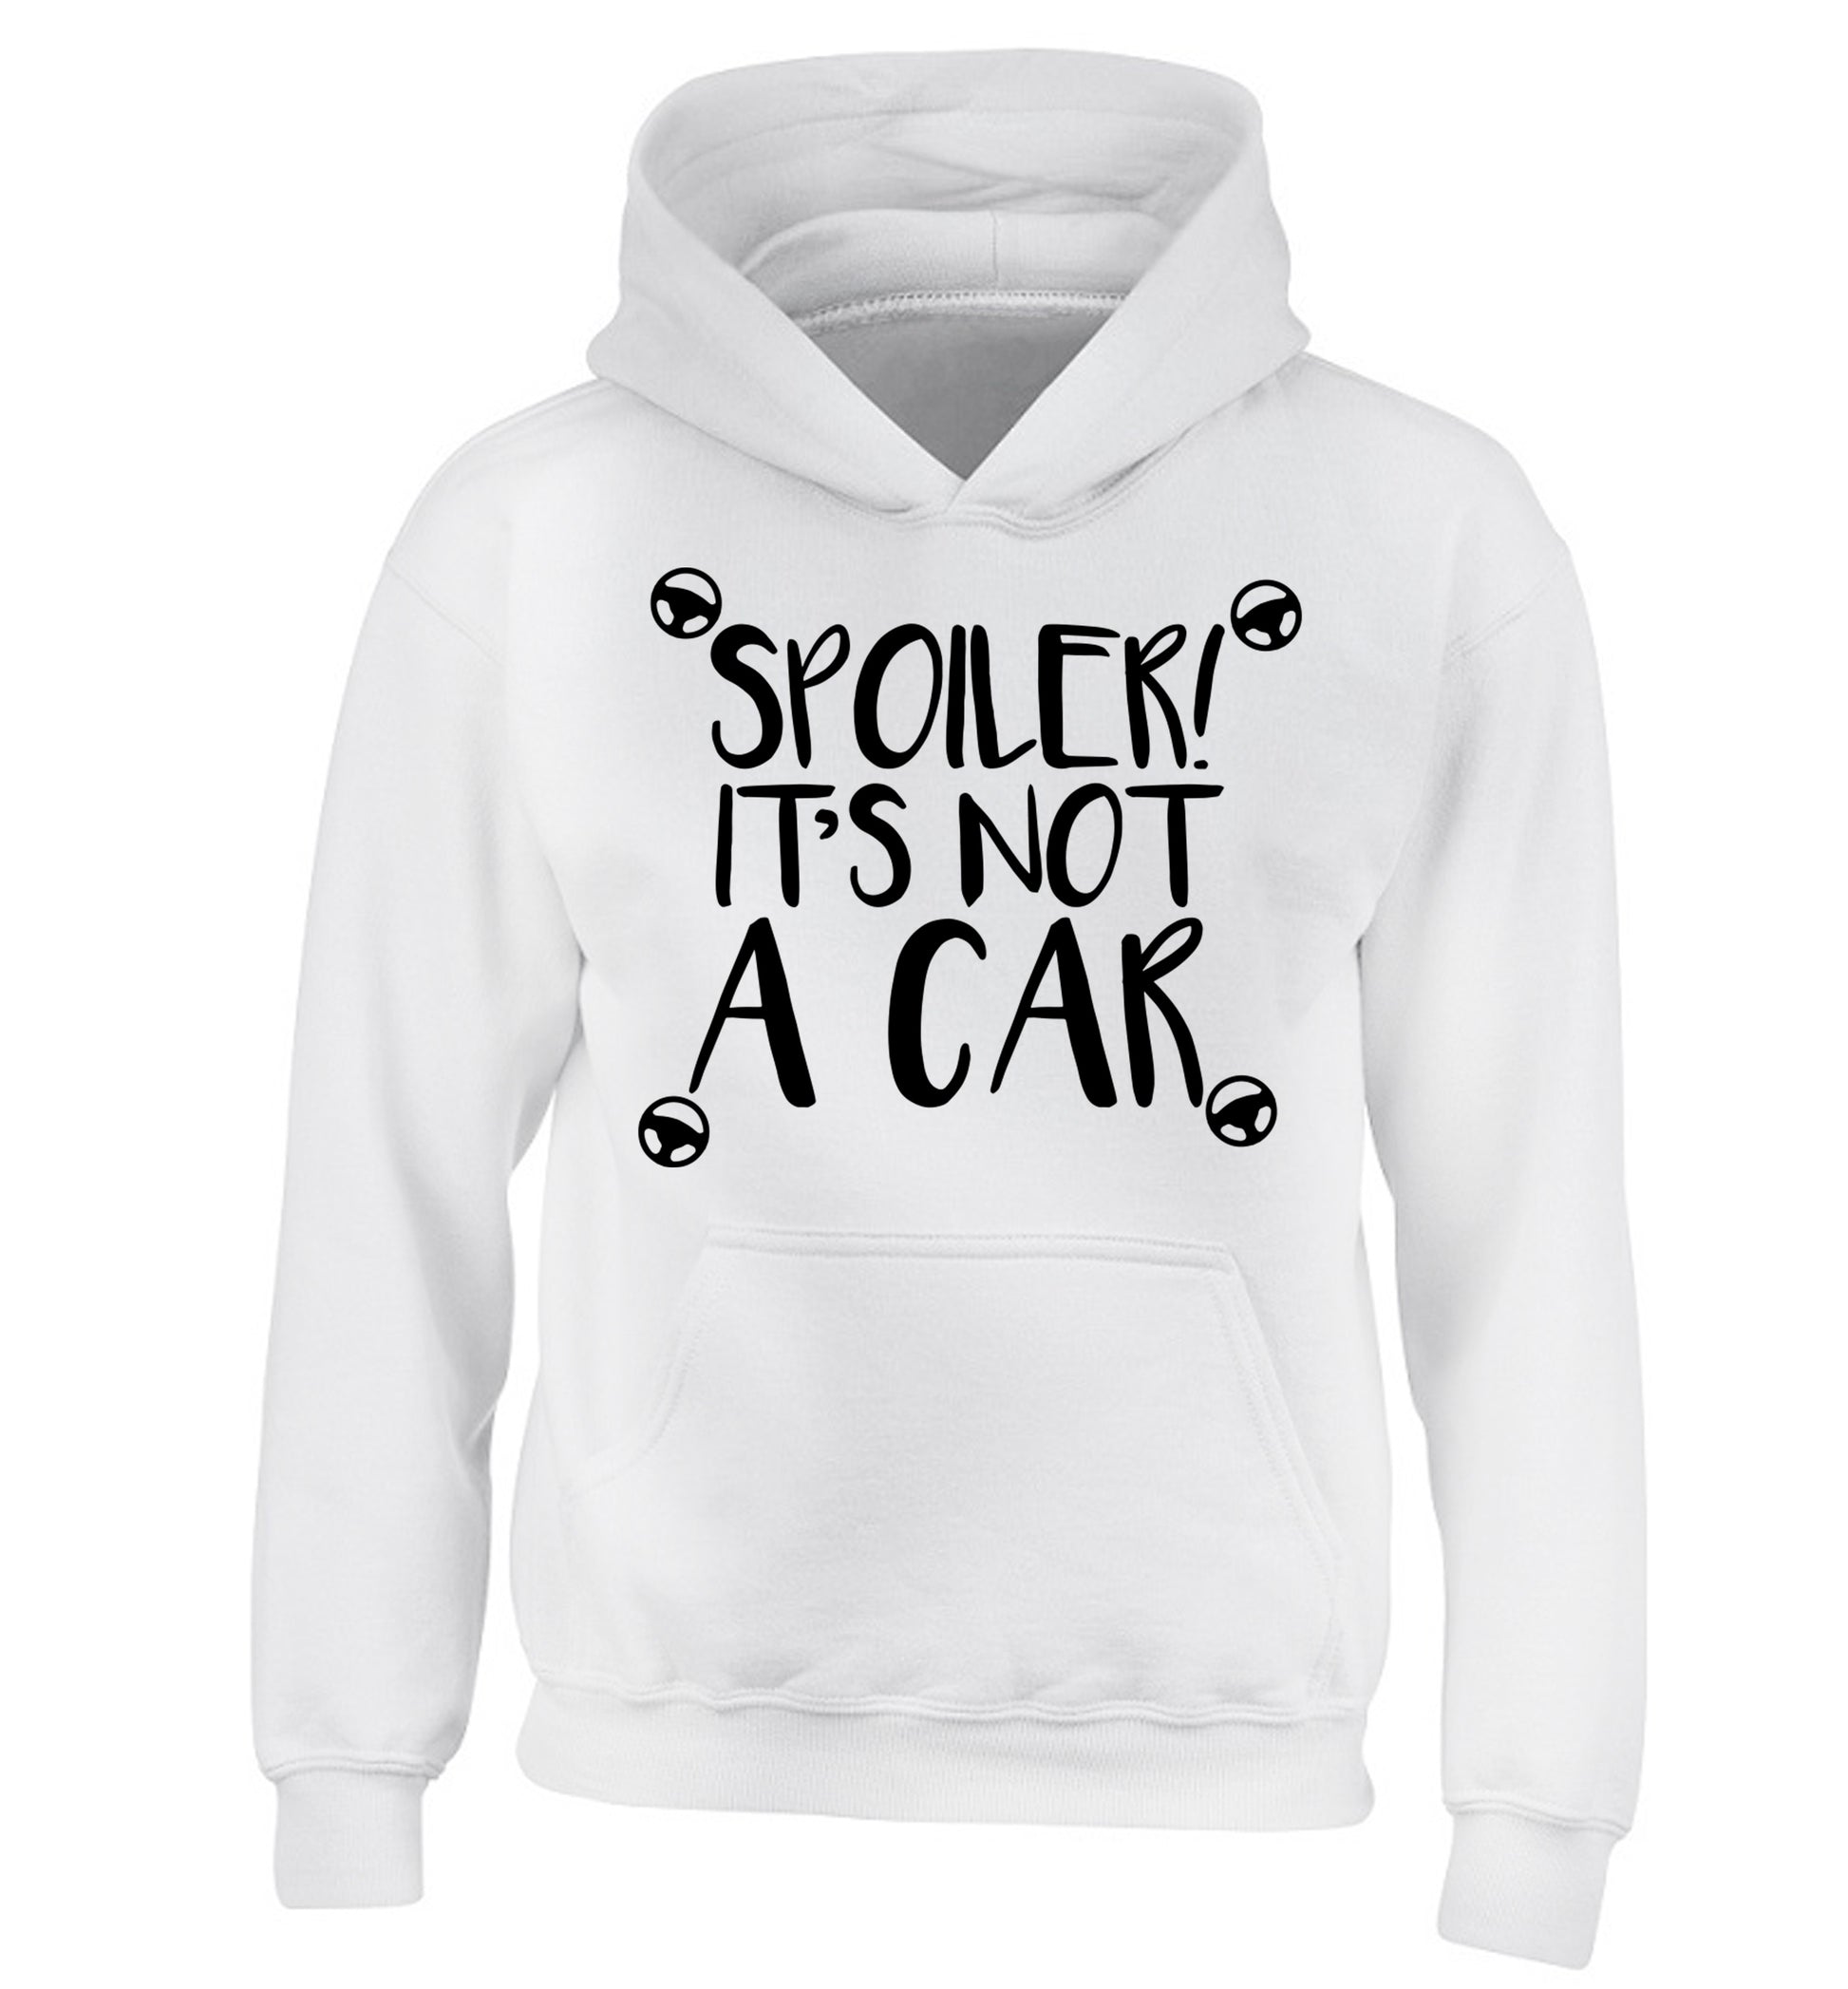 Spoiler it's not a car children's white hoodie 12-13 Years